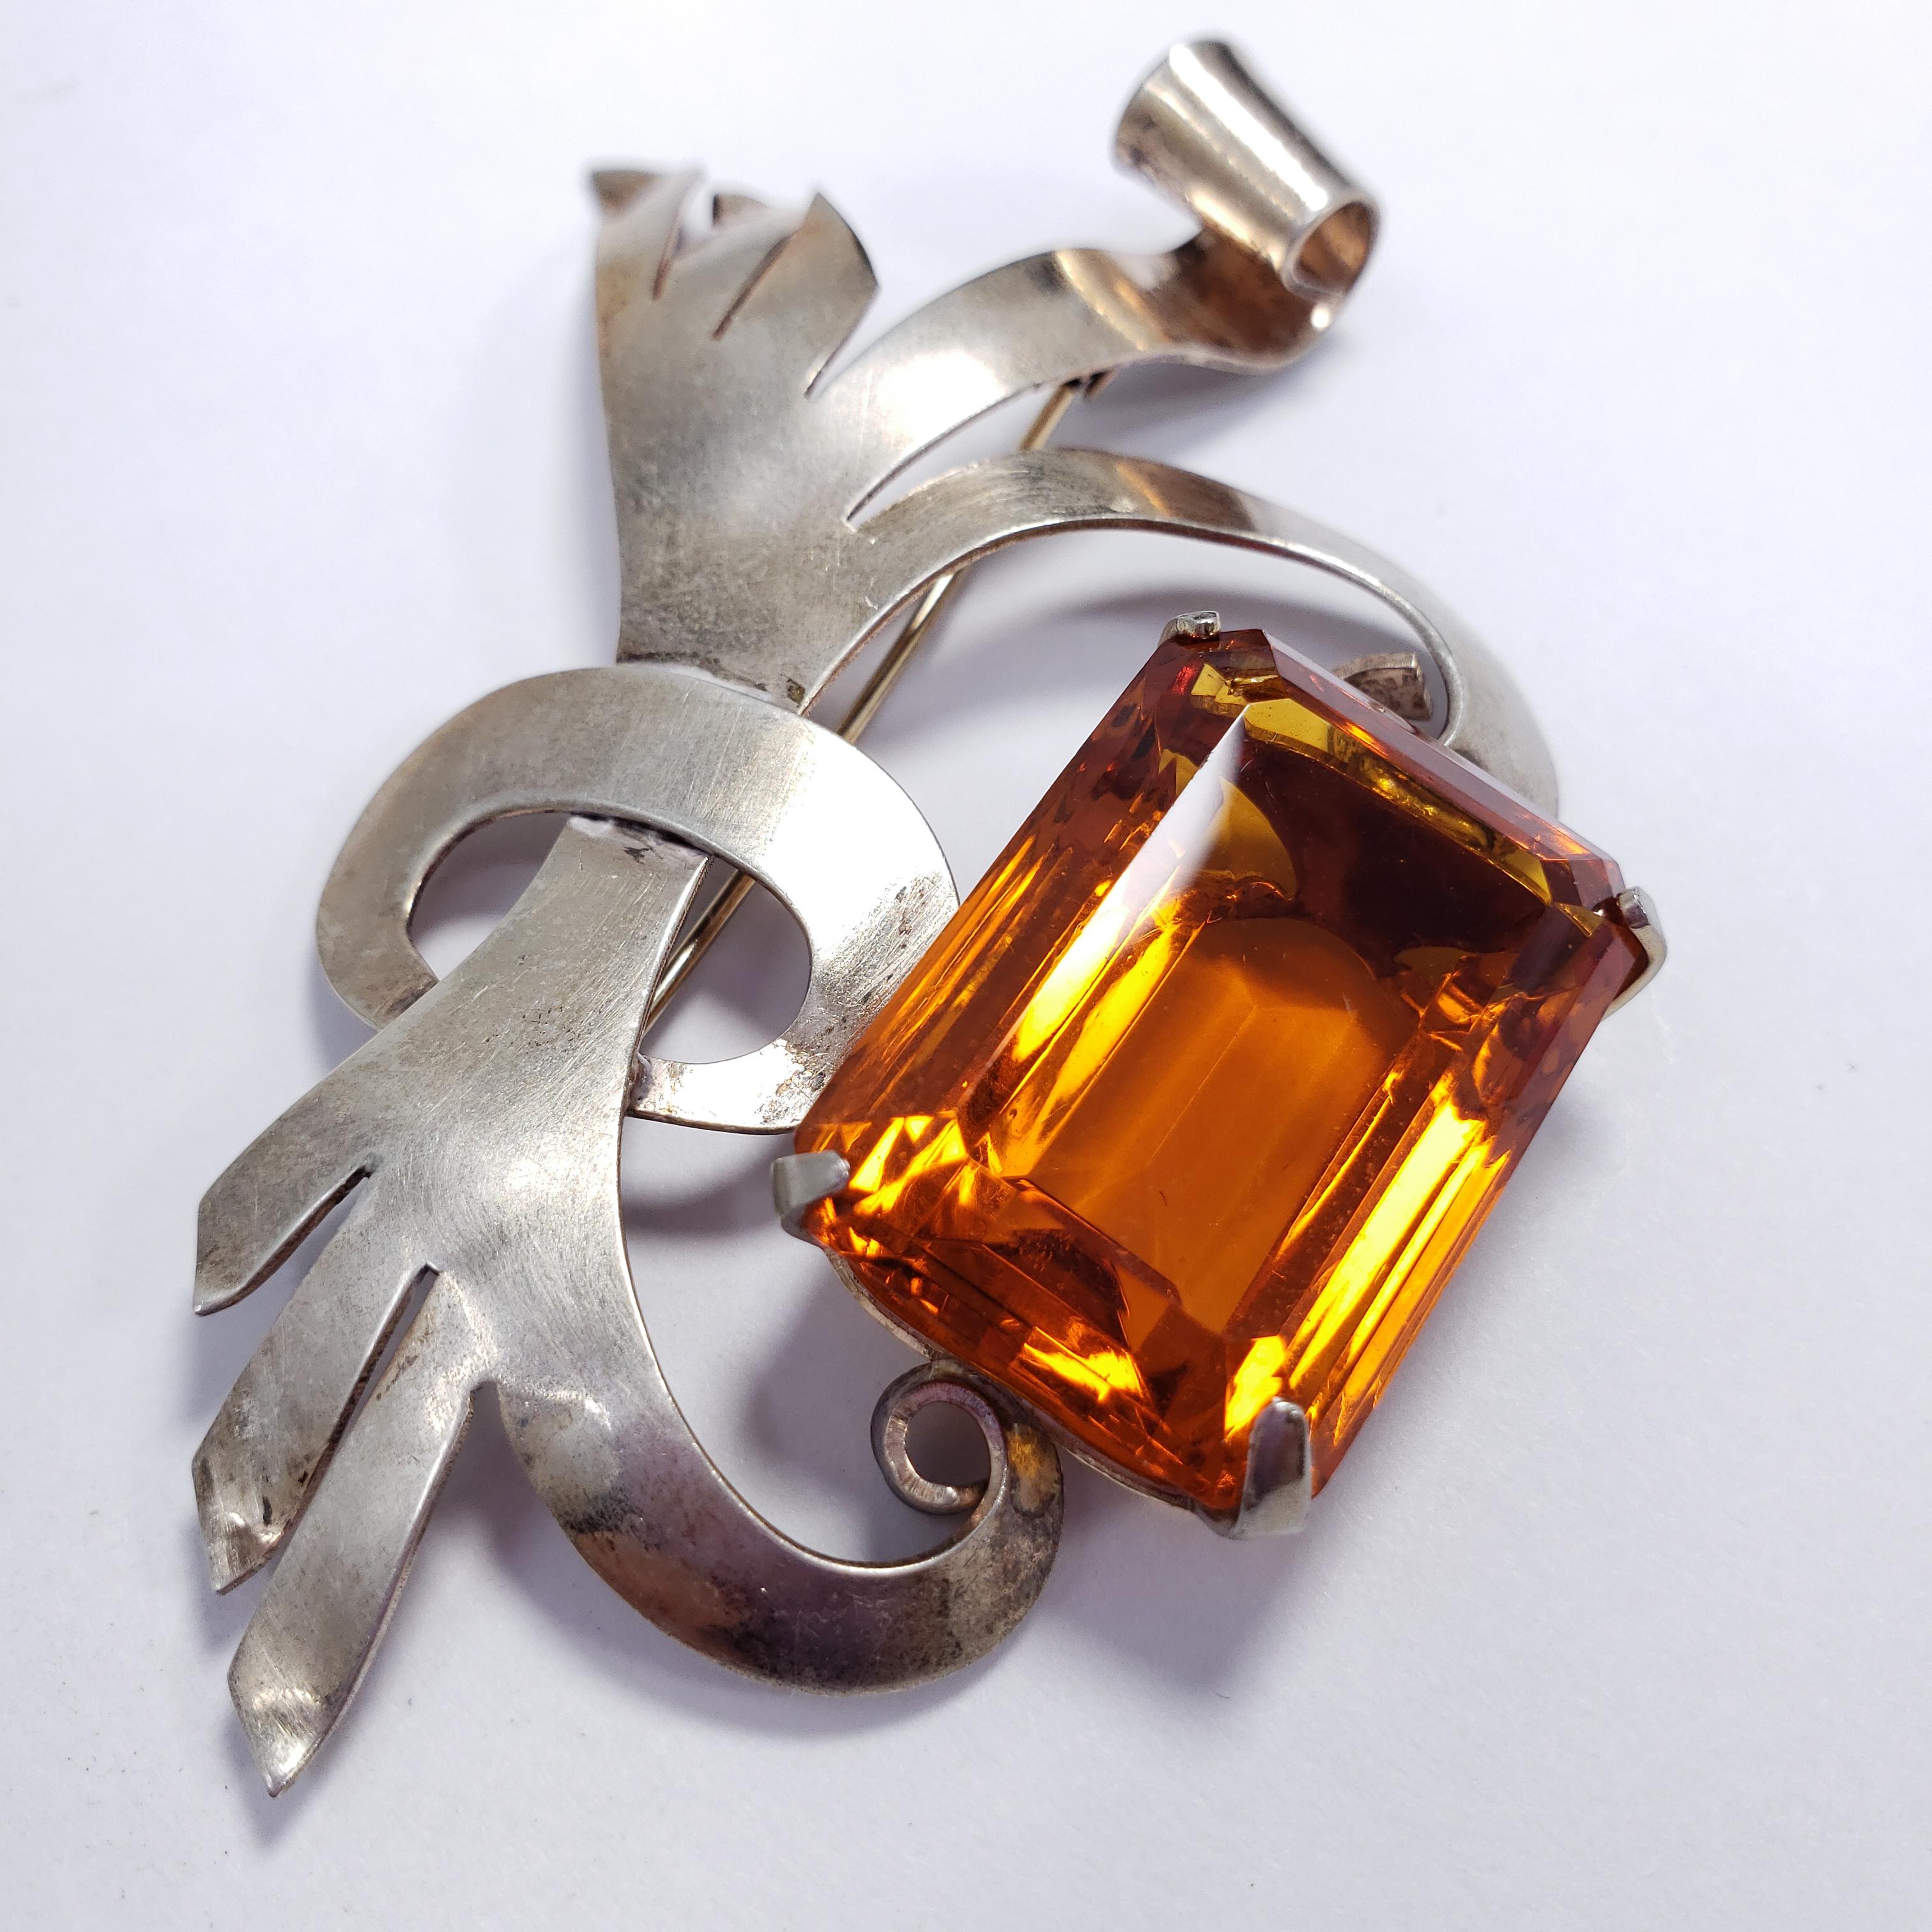 A pin brooch by Lampl. It features a decorative sterling silver bow-like motif, accented with a large emerald cut dark orange crystal. A stylish vintage accessory!

Hallmarks: Sterling, Lampl